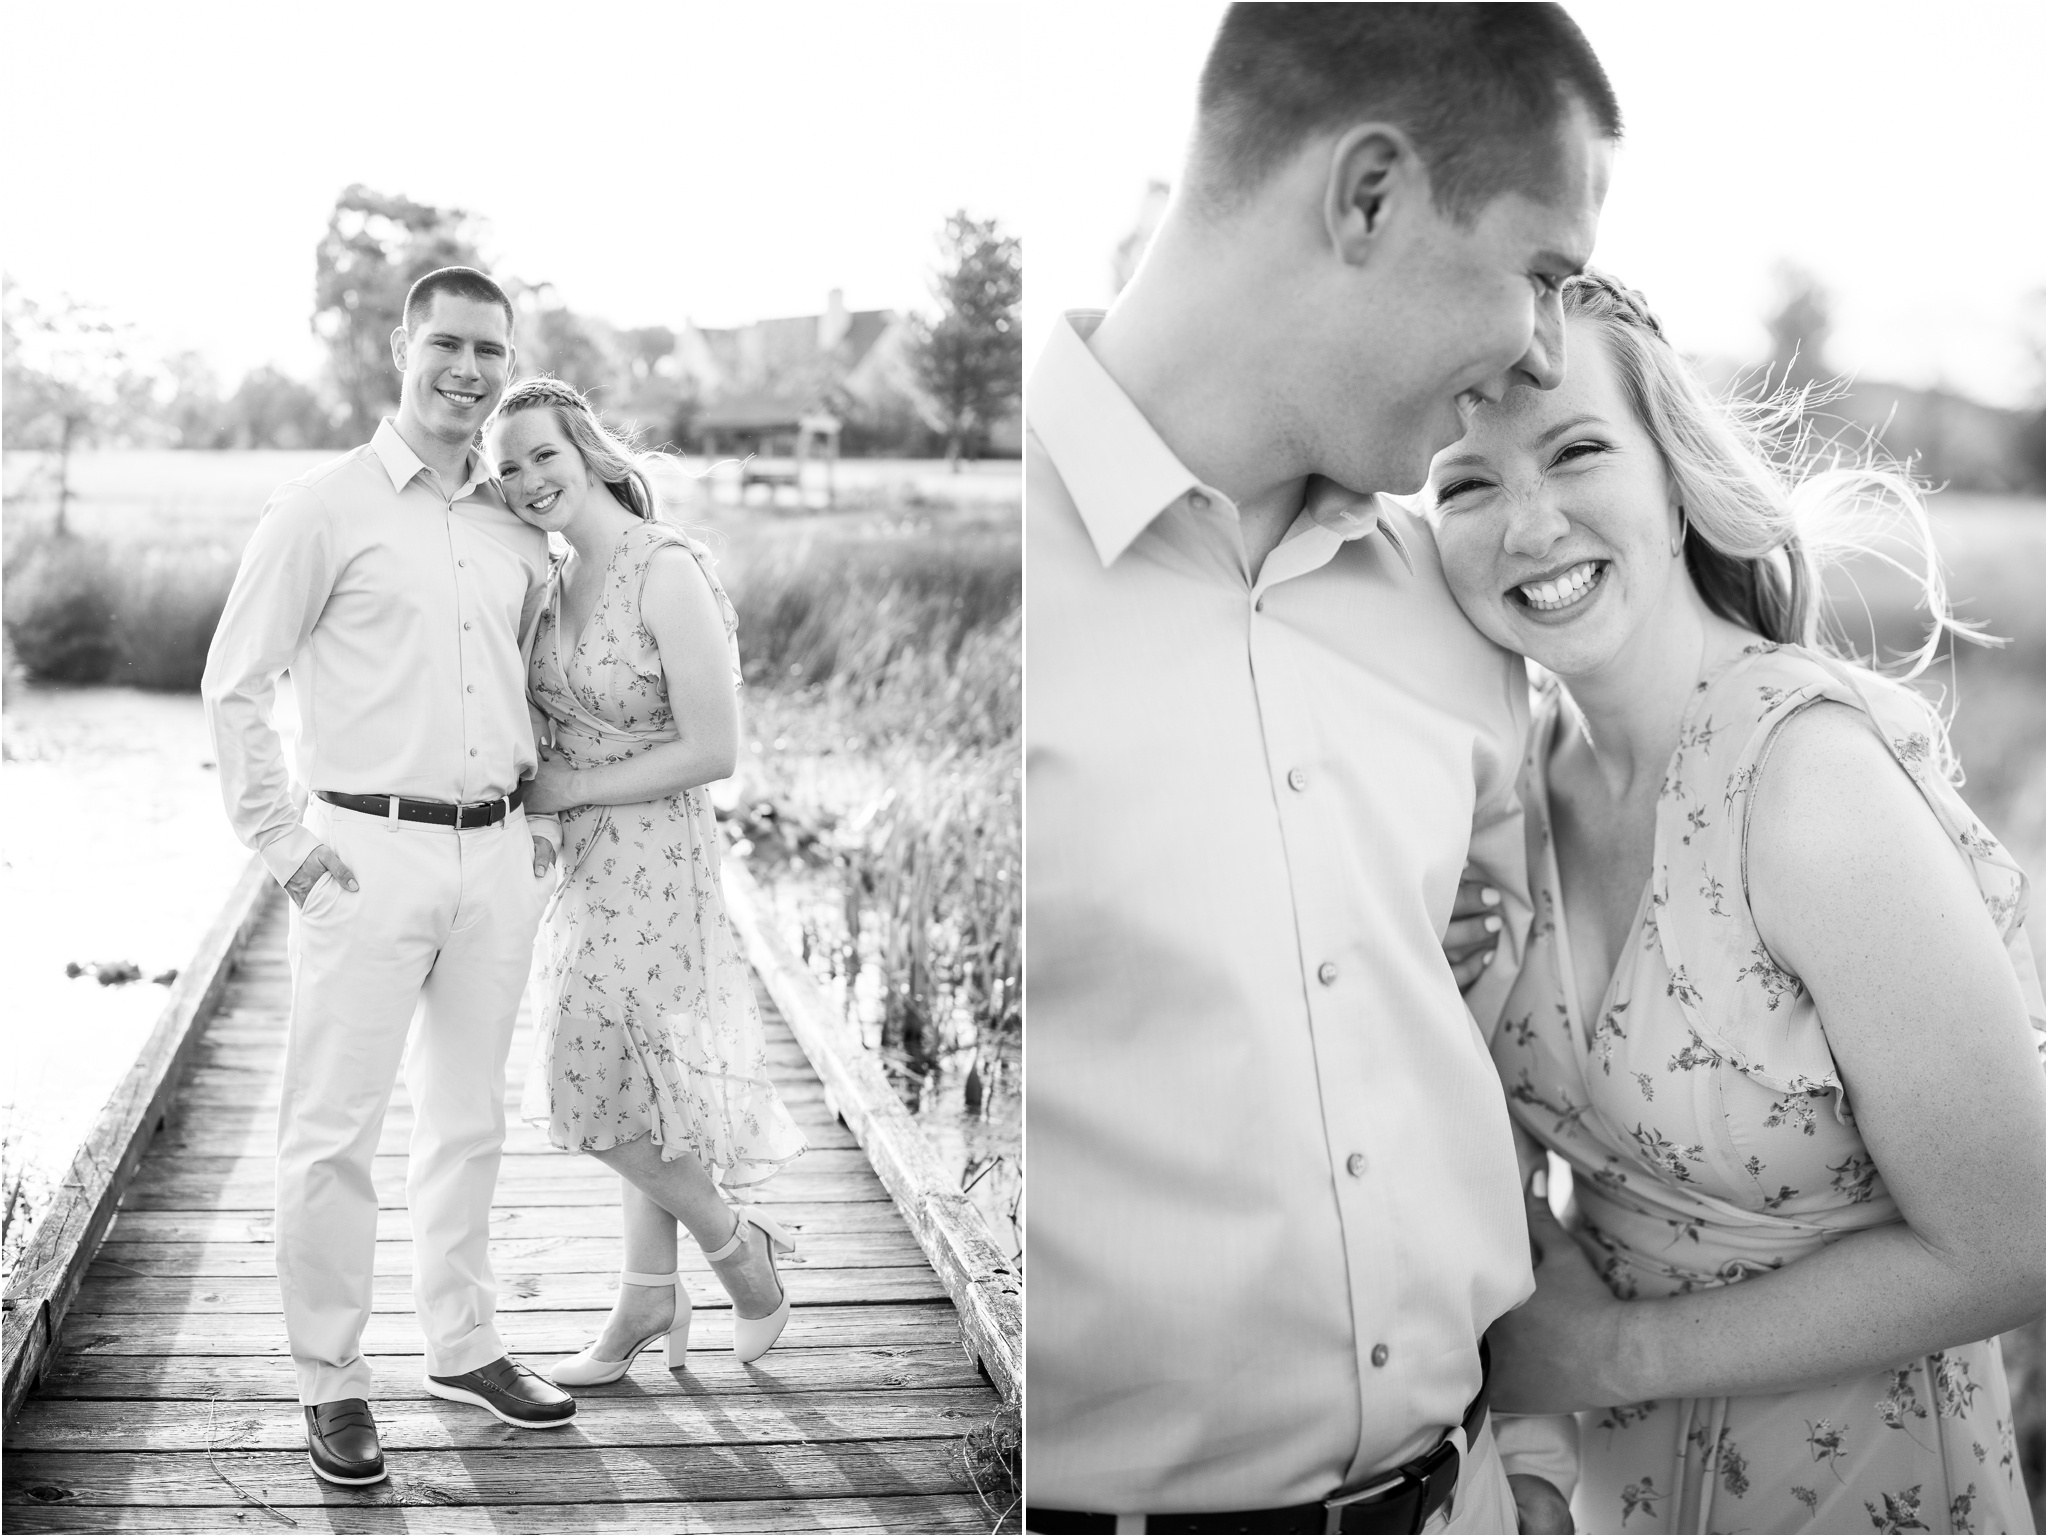 Southern Style engagement session in Indiana